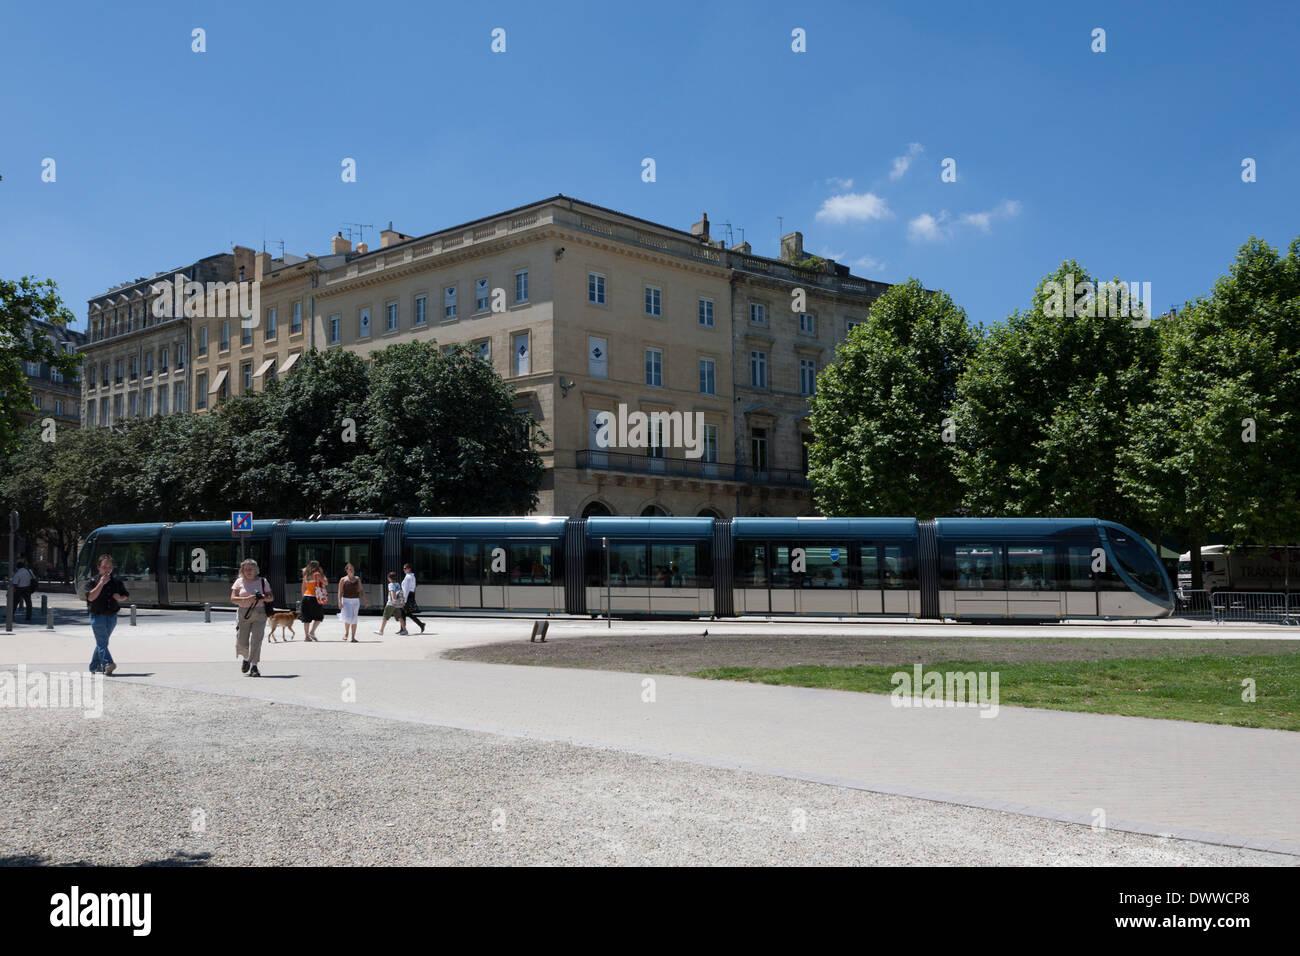 Tramway in Bordeaux France with people walking in the Place des Quinconces near the Monument aux Girondins Stock Photo